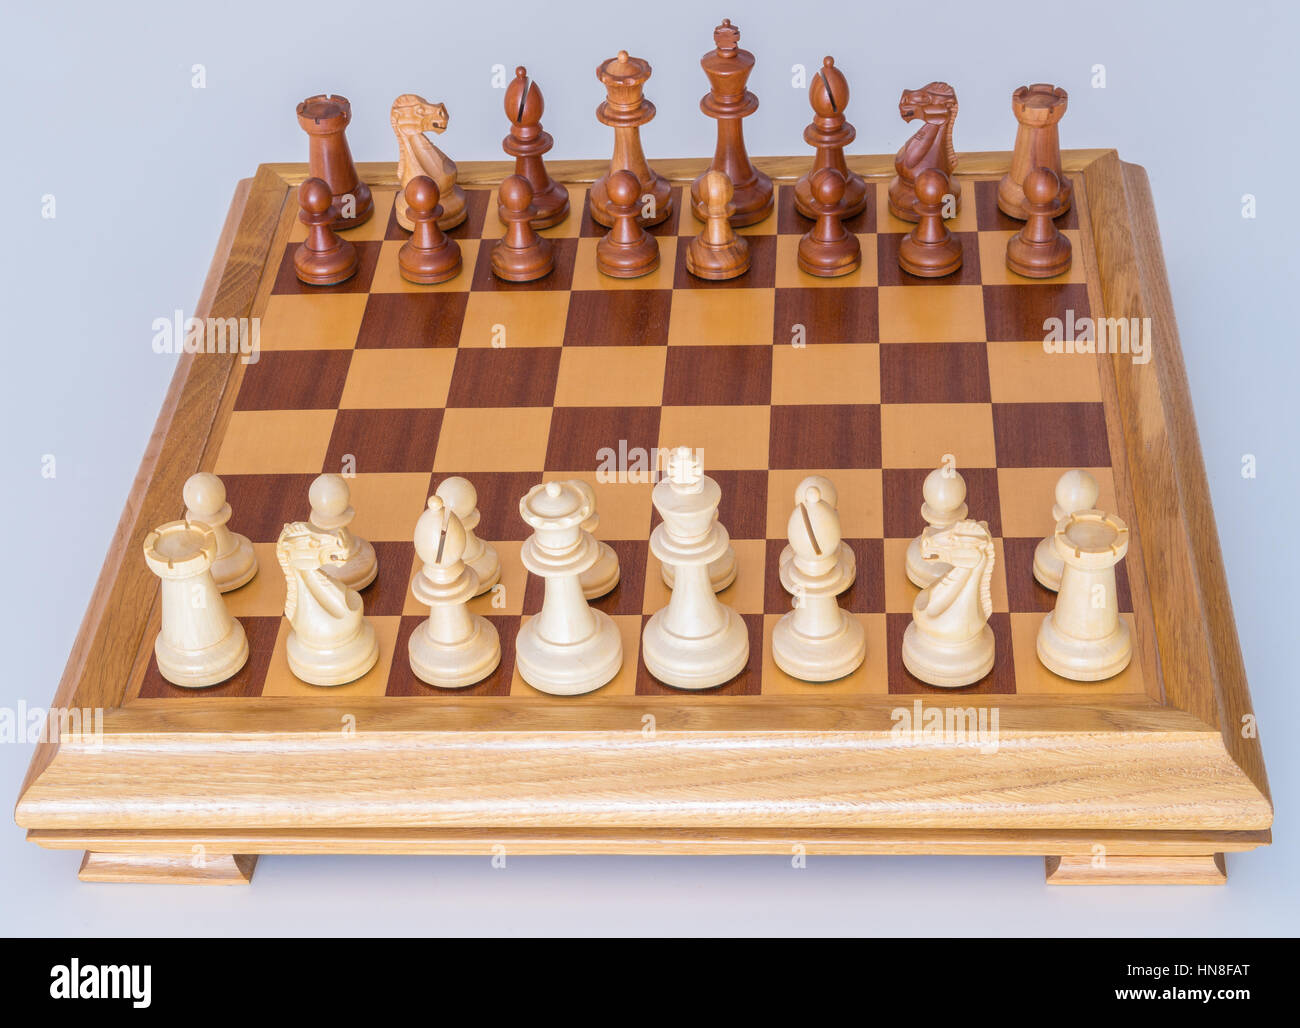 Chess pieces in starting position on a wooden oak Board Stock Photo